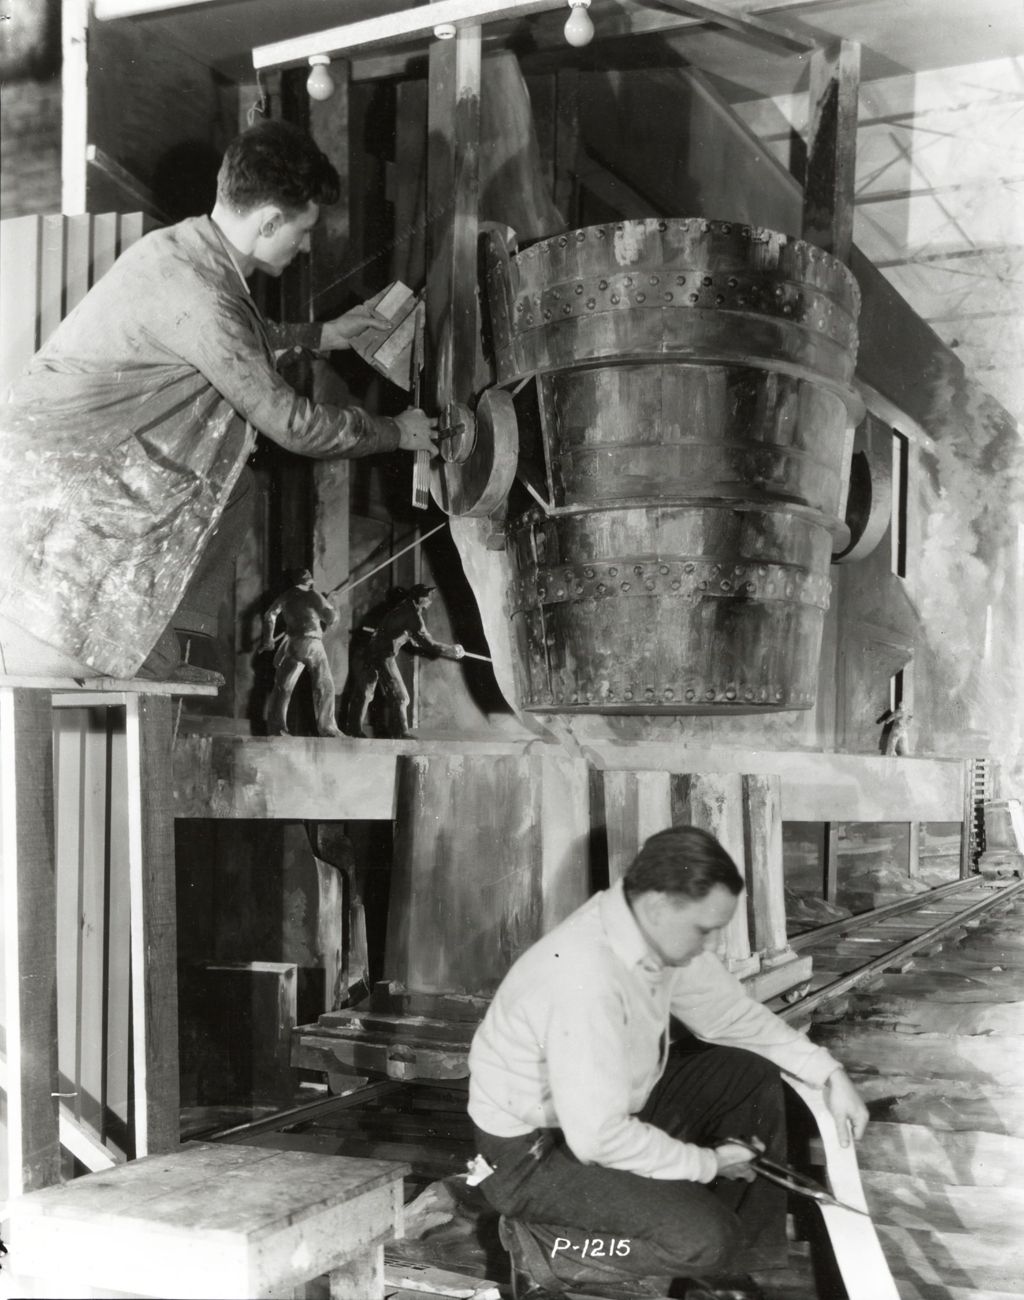 Miniature of Large-scale U.S. Steel diorama of the Bessemer manufacturing process used to make steel